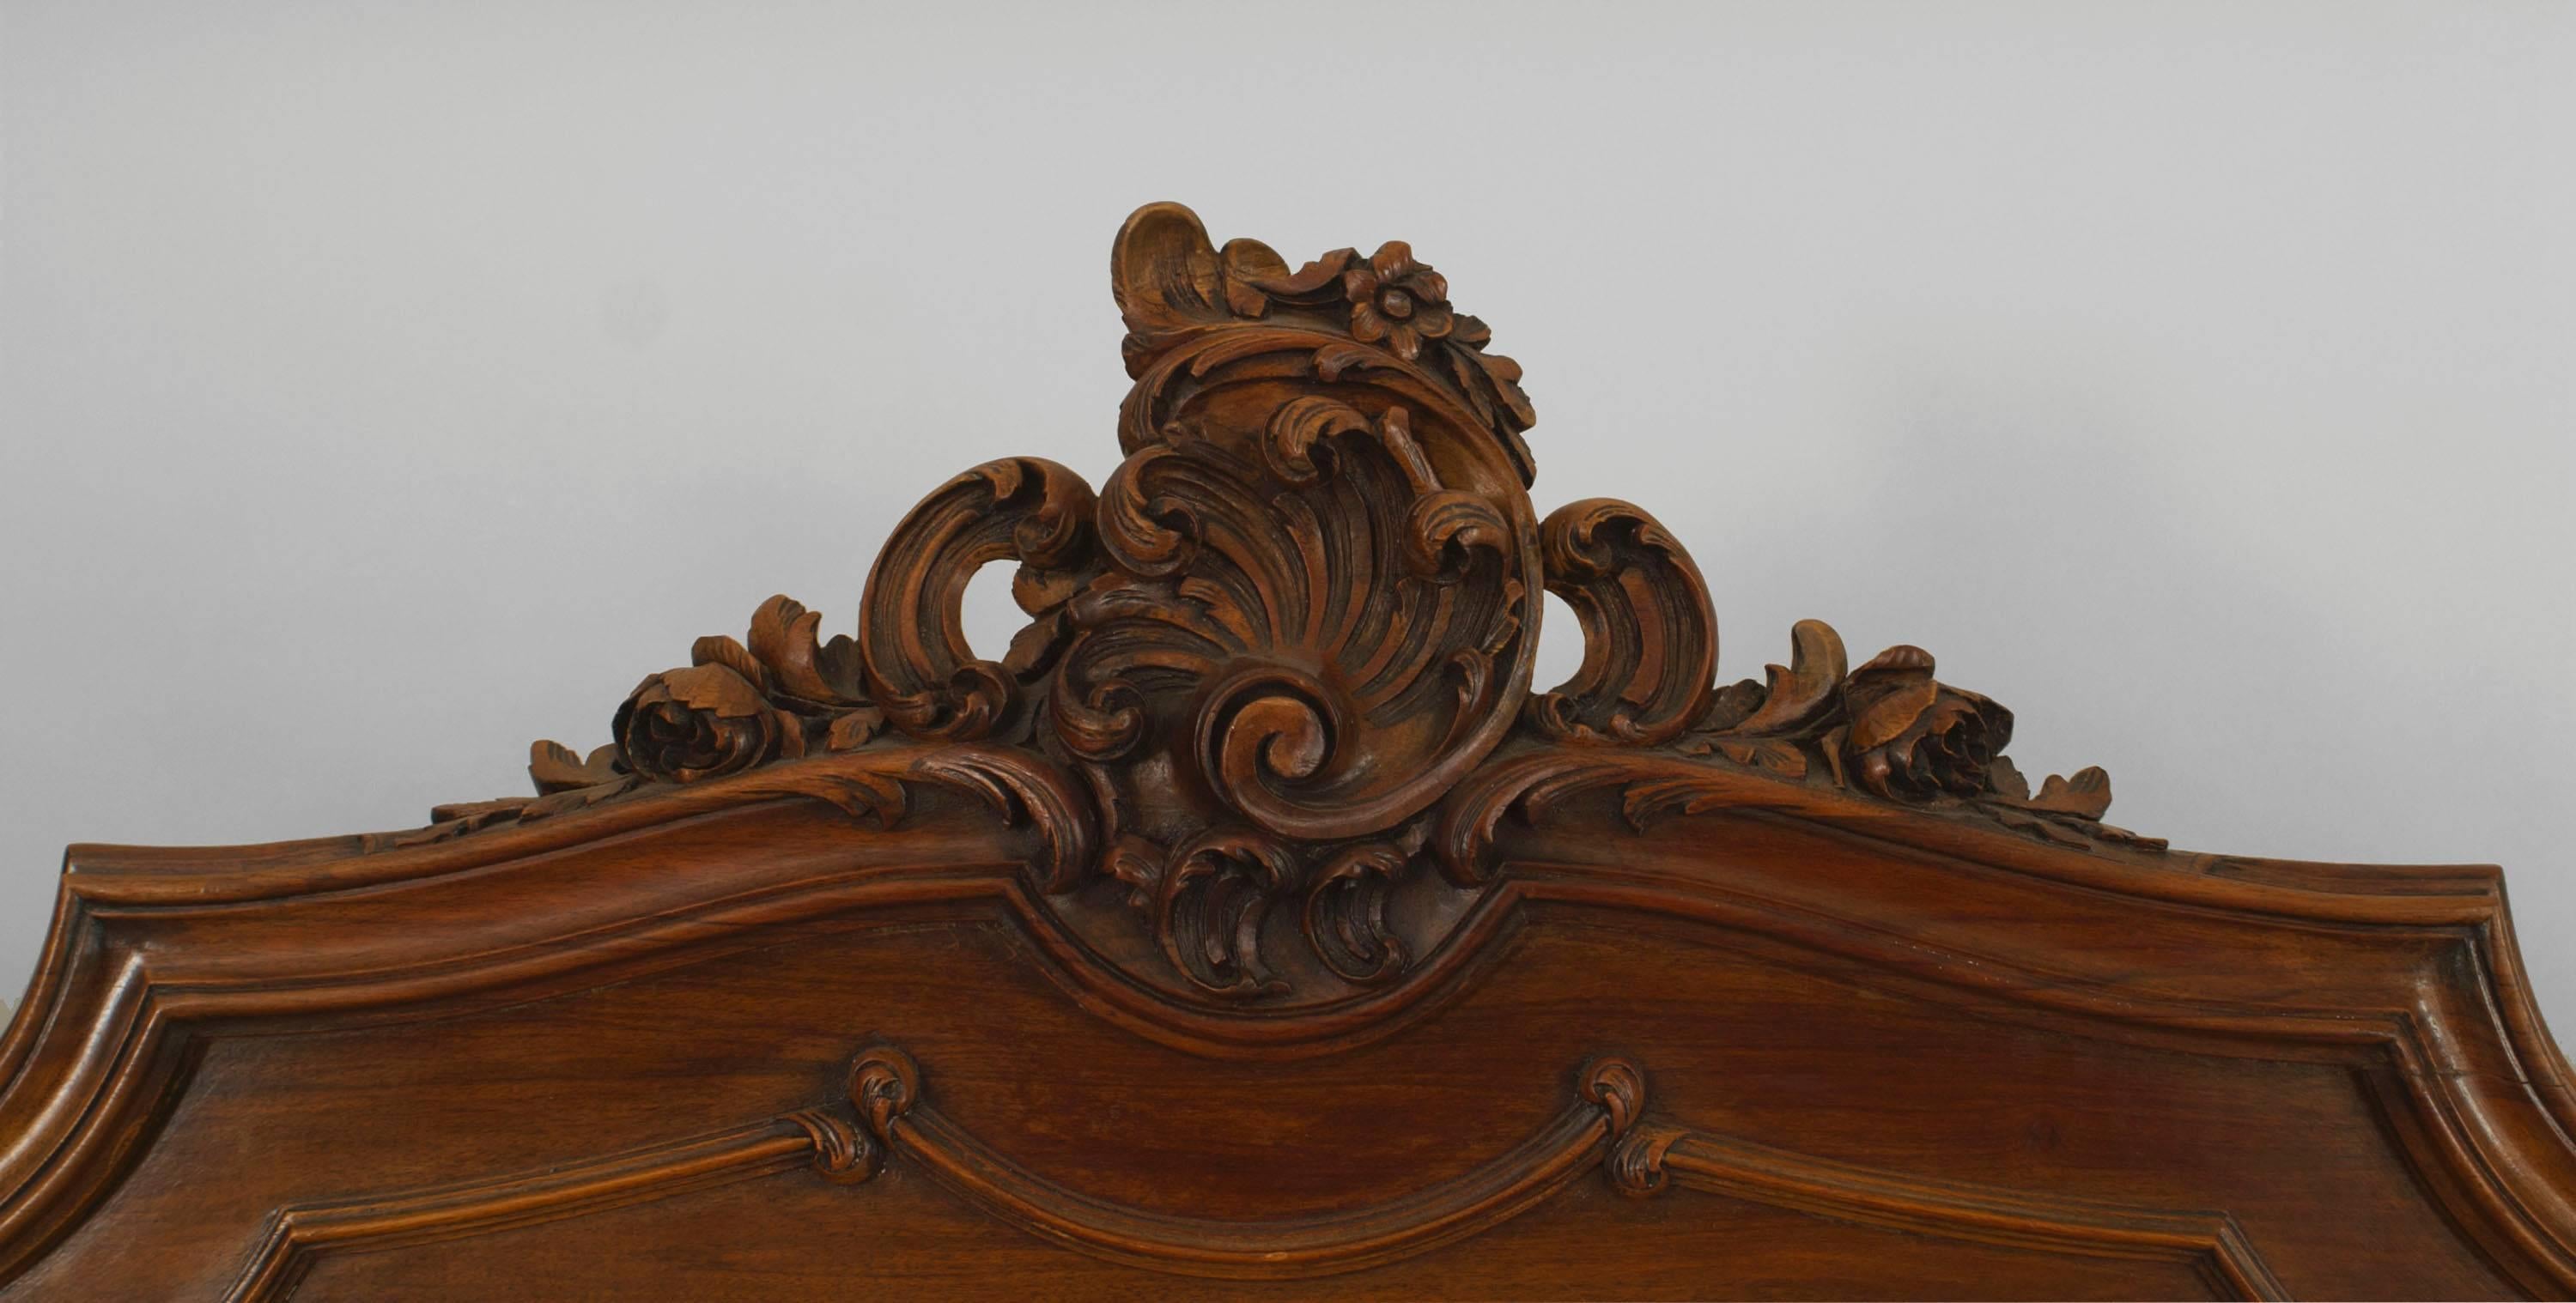 French, Louis XV provincial style walnut full-size bed with shell carving.
Headboard, footboard, rails, 19th-20th century.